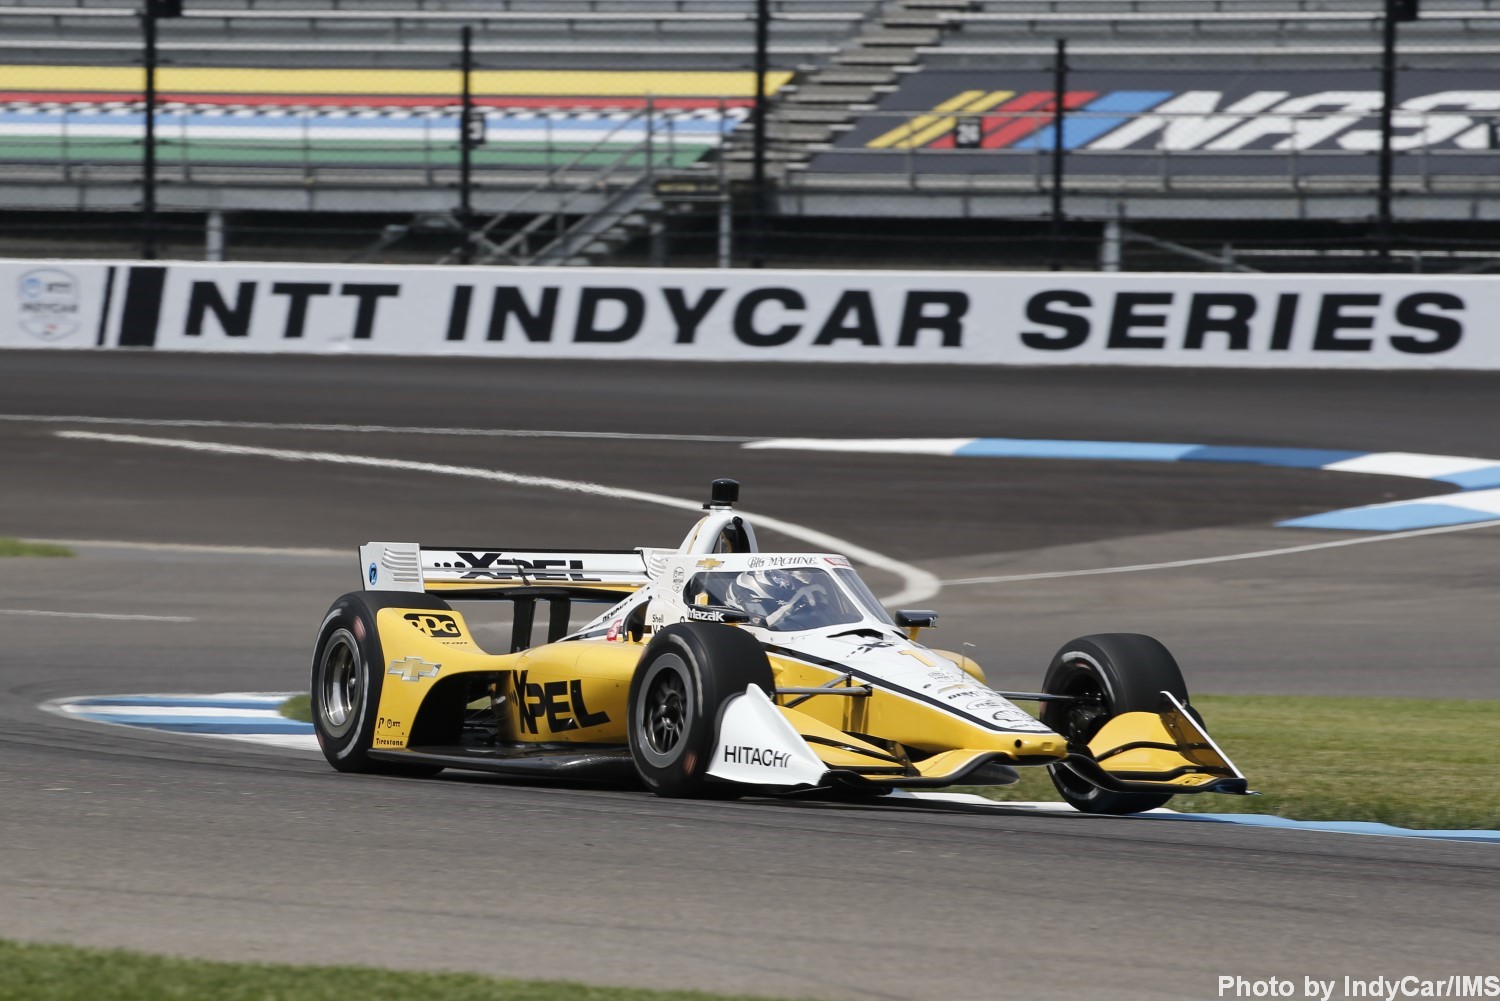 Newgarden got the IndyCar closed pit screw on this day. Is this a sport of luck or skill?